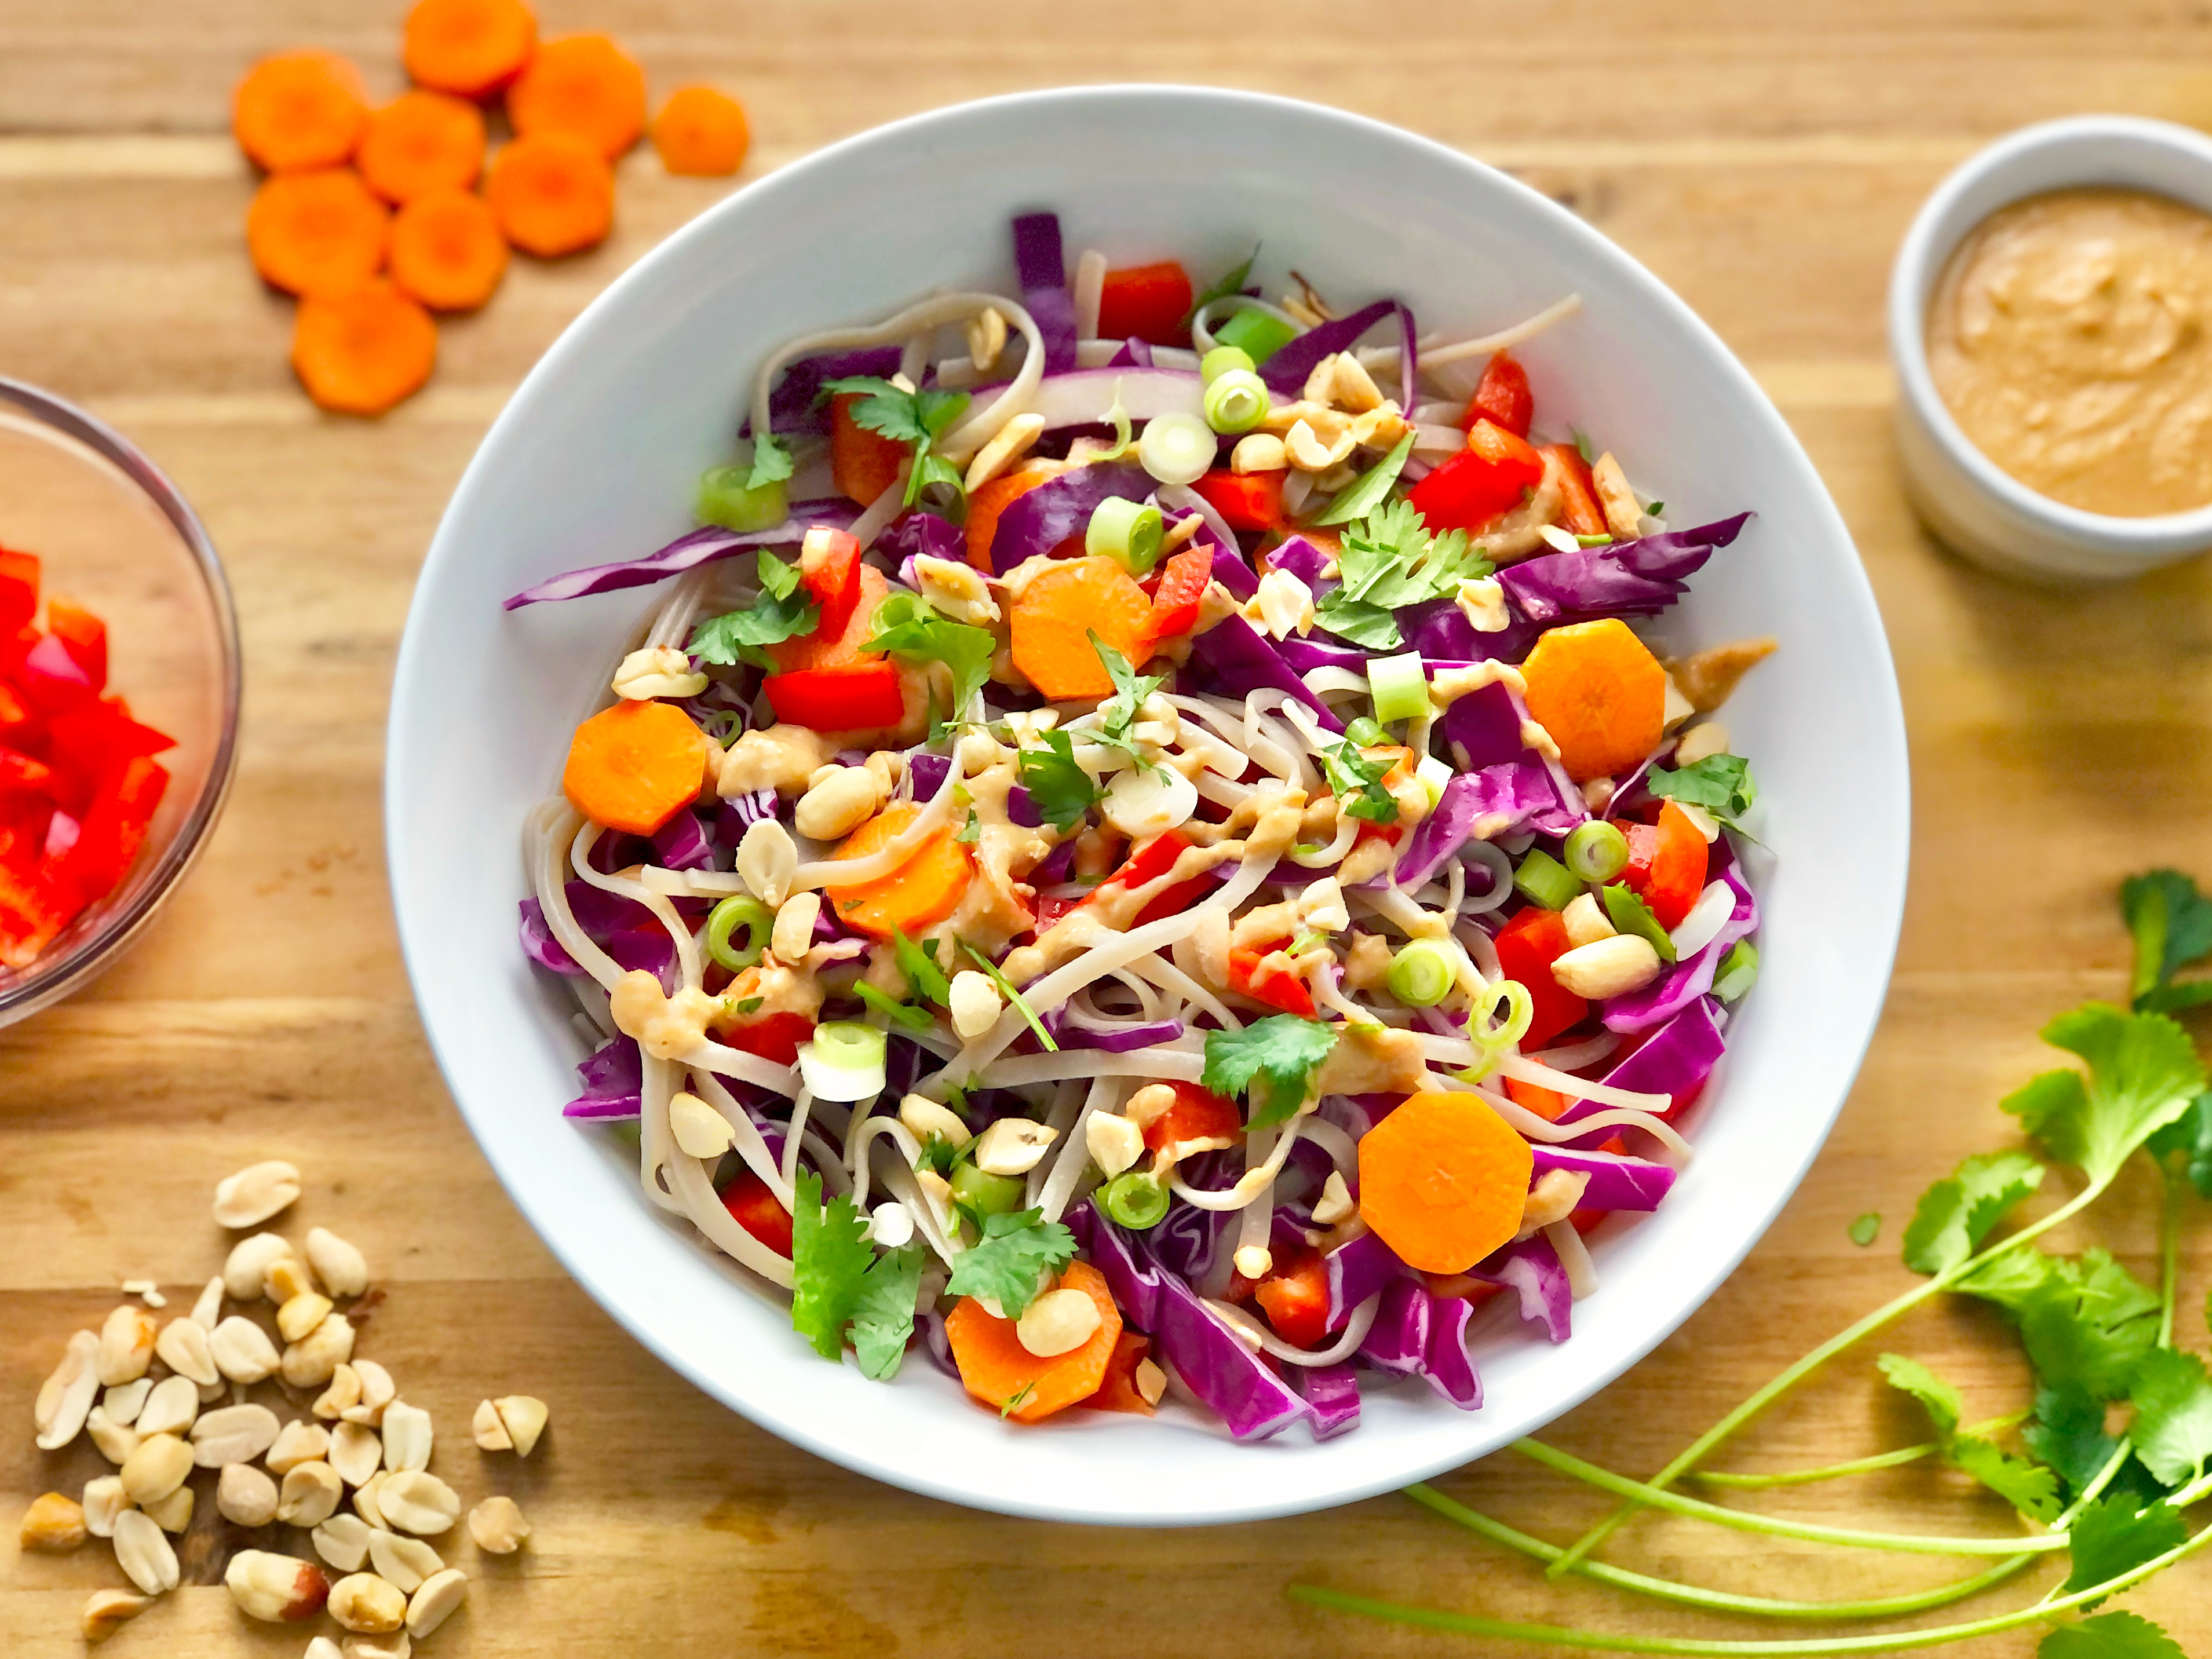 colorful salad with carrots, noodles, cabbage, and peanuts